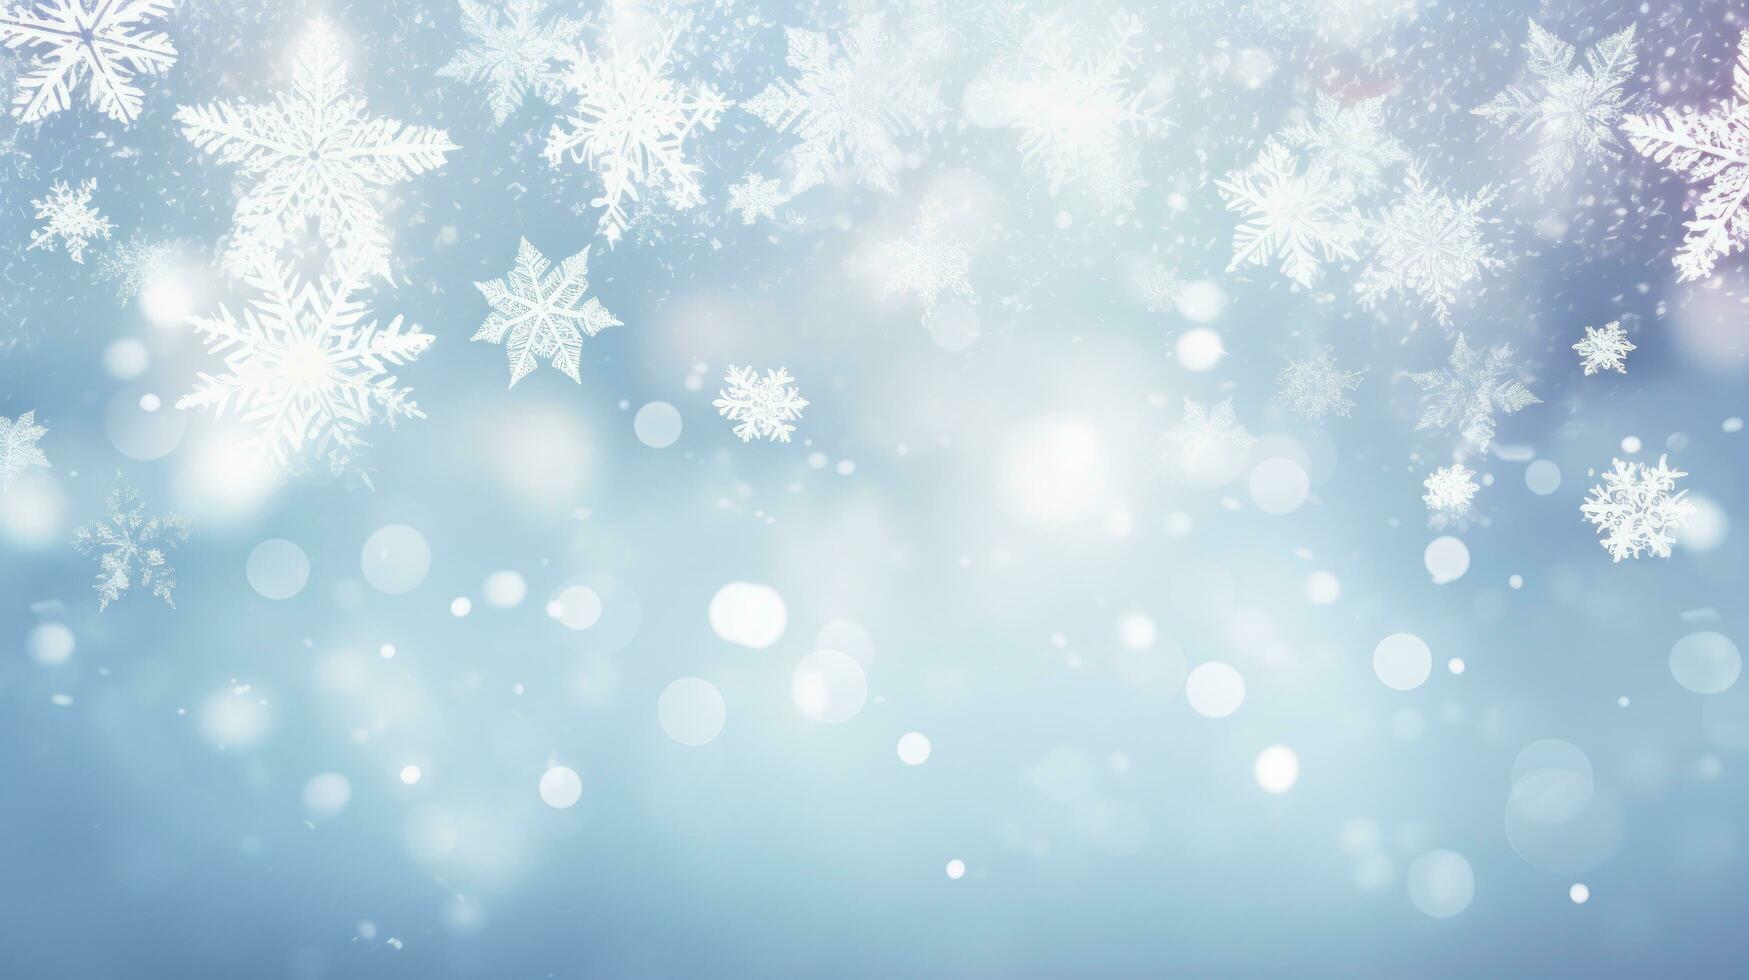 Winter natural background with snowflakes photo